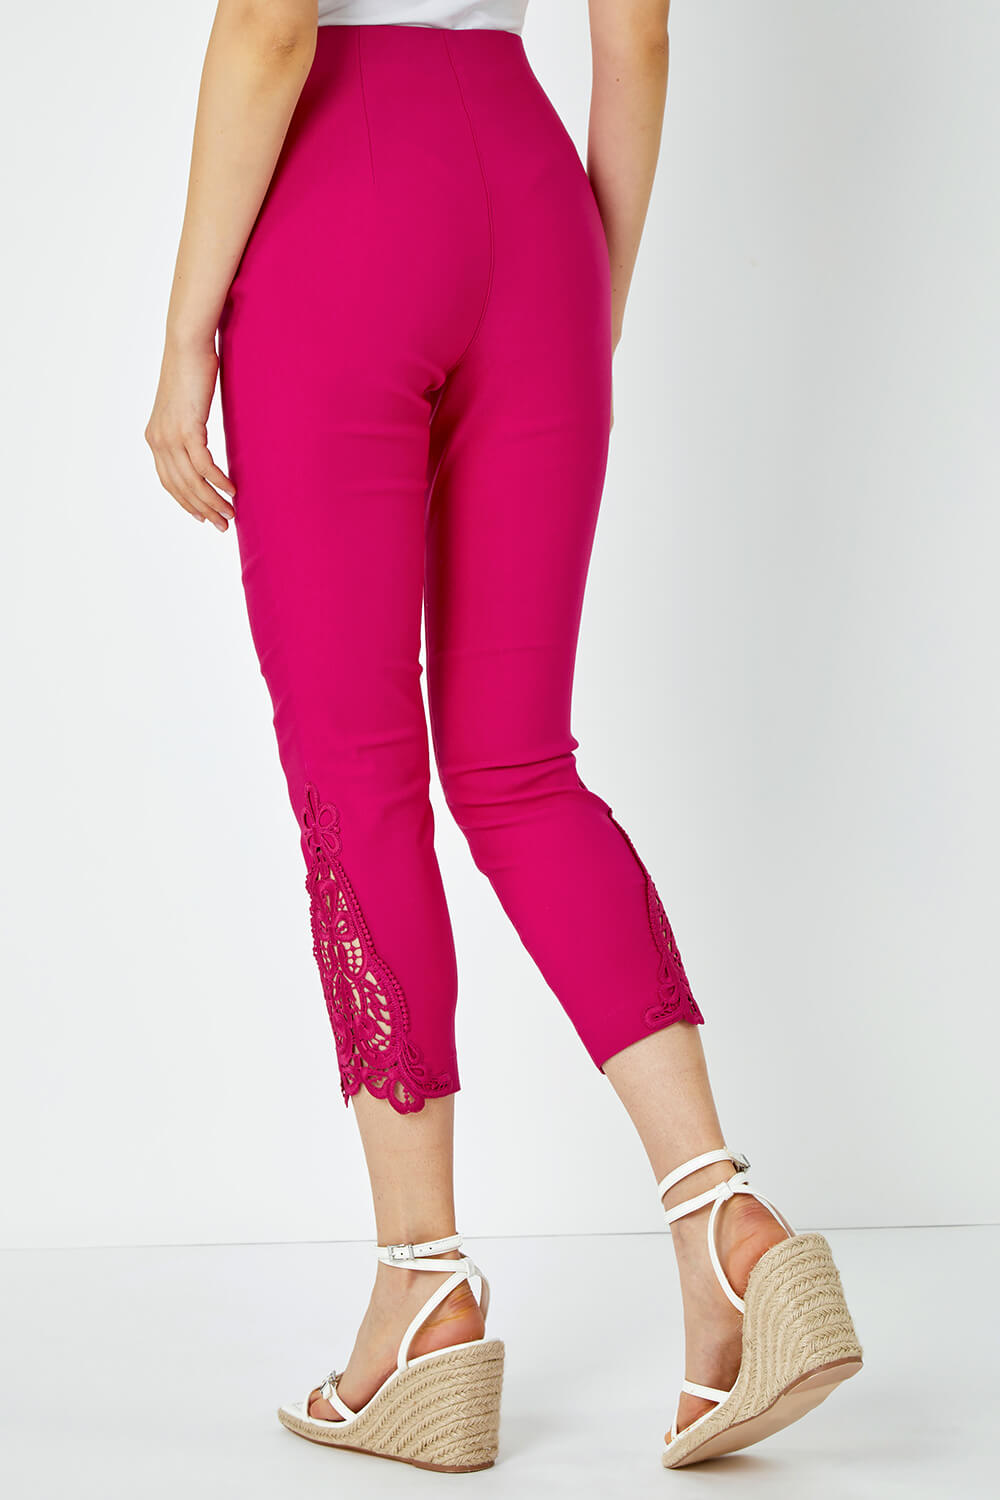 CERISE Lace Insert Crop Stretch Trousers, Image 3 of 5